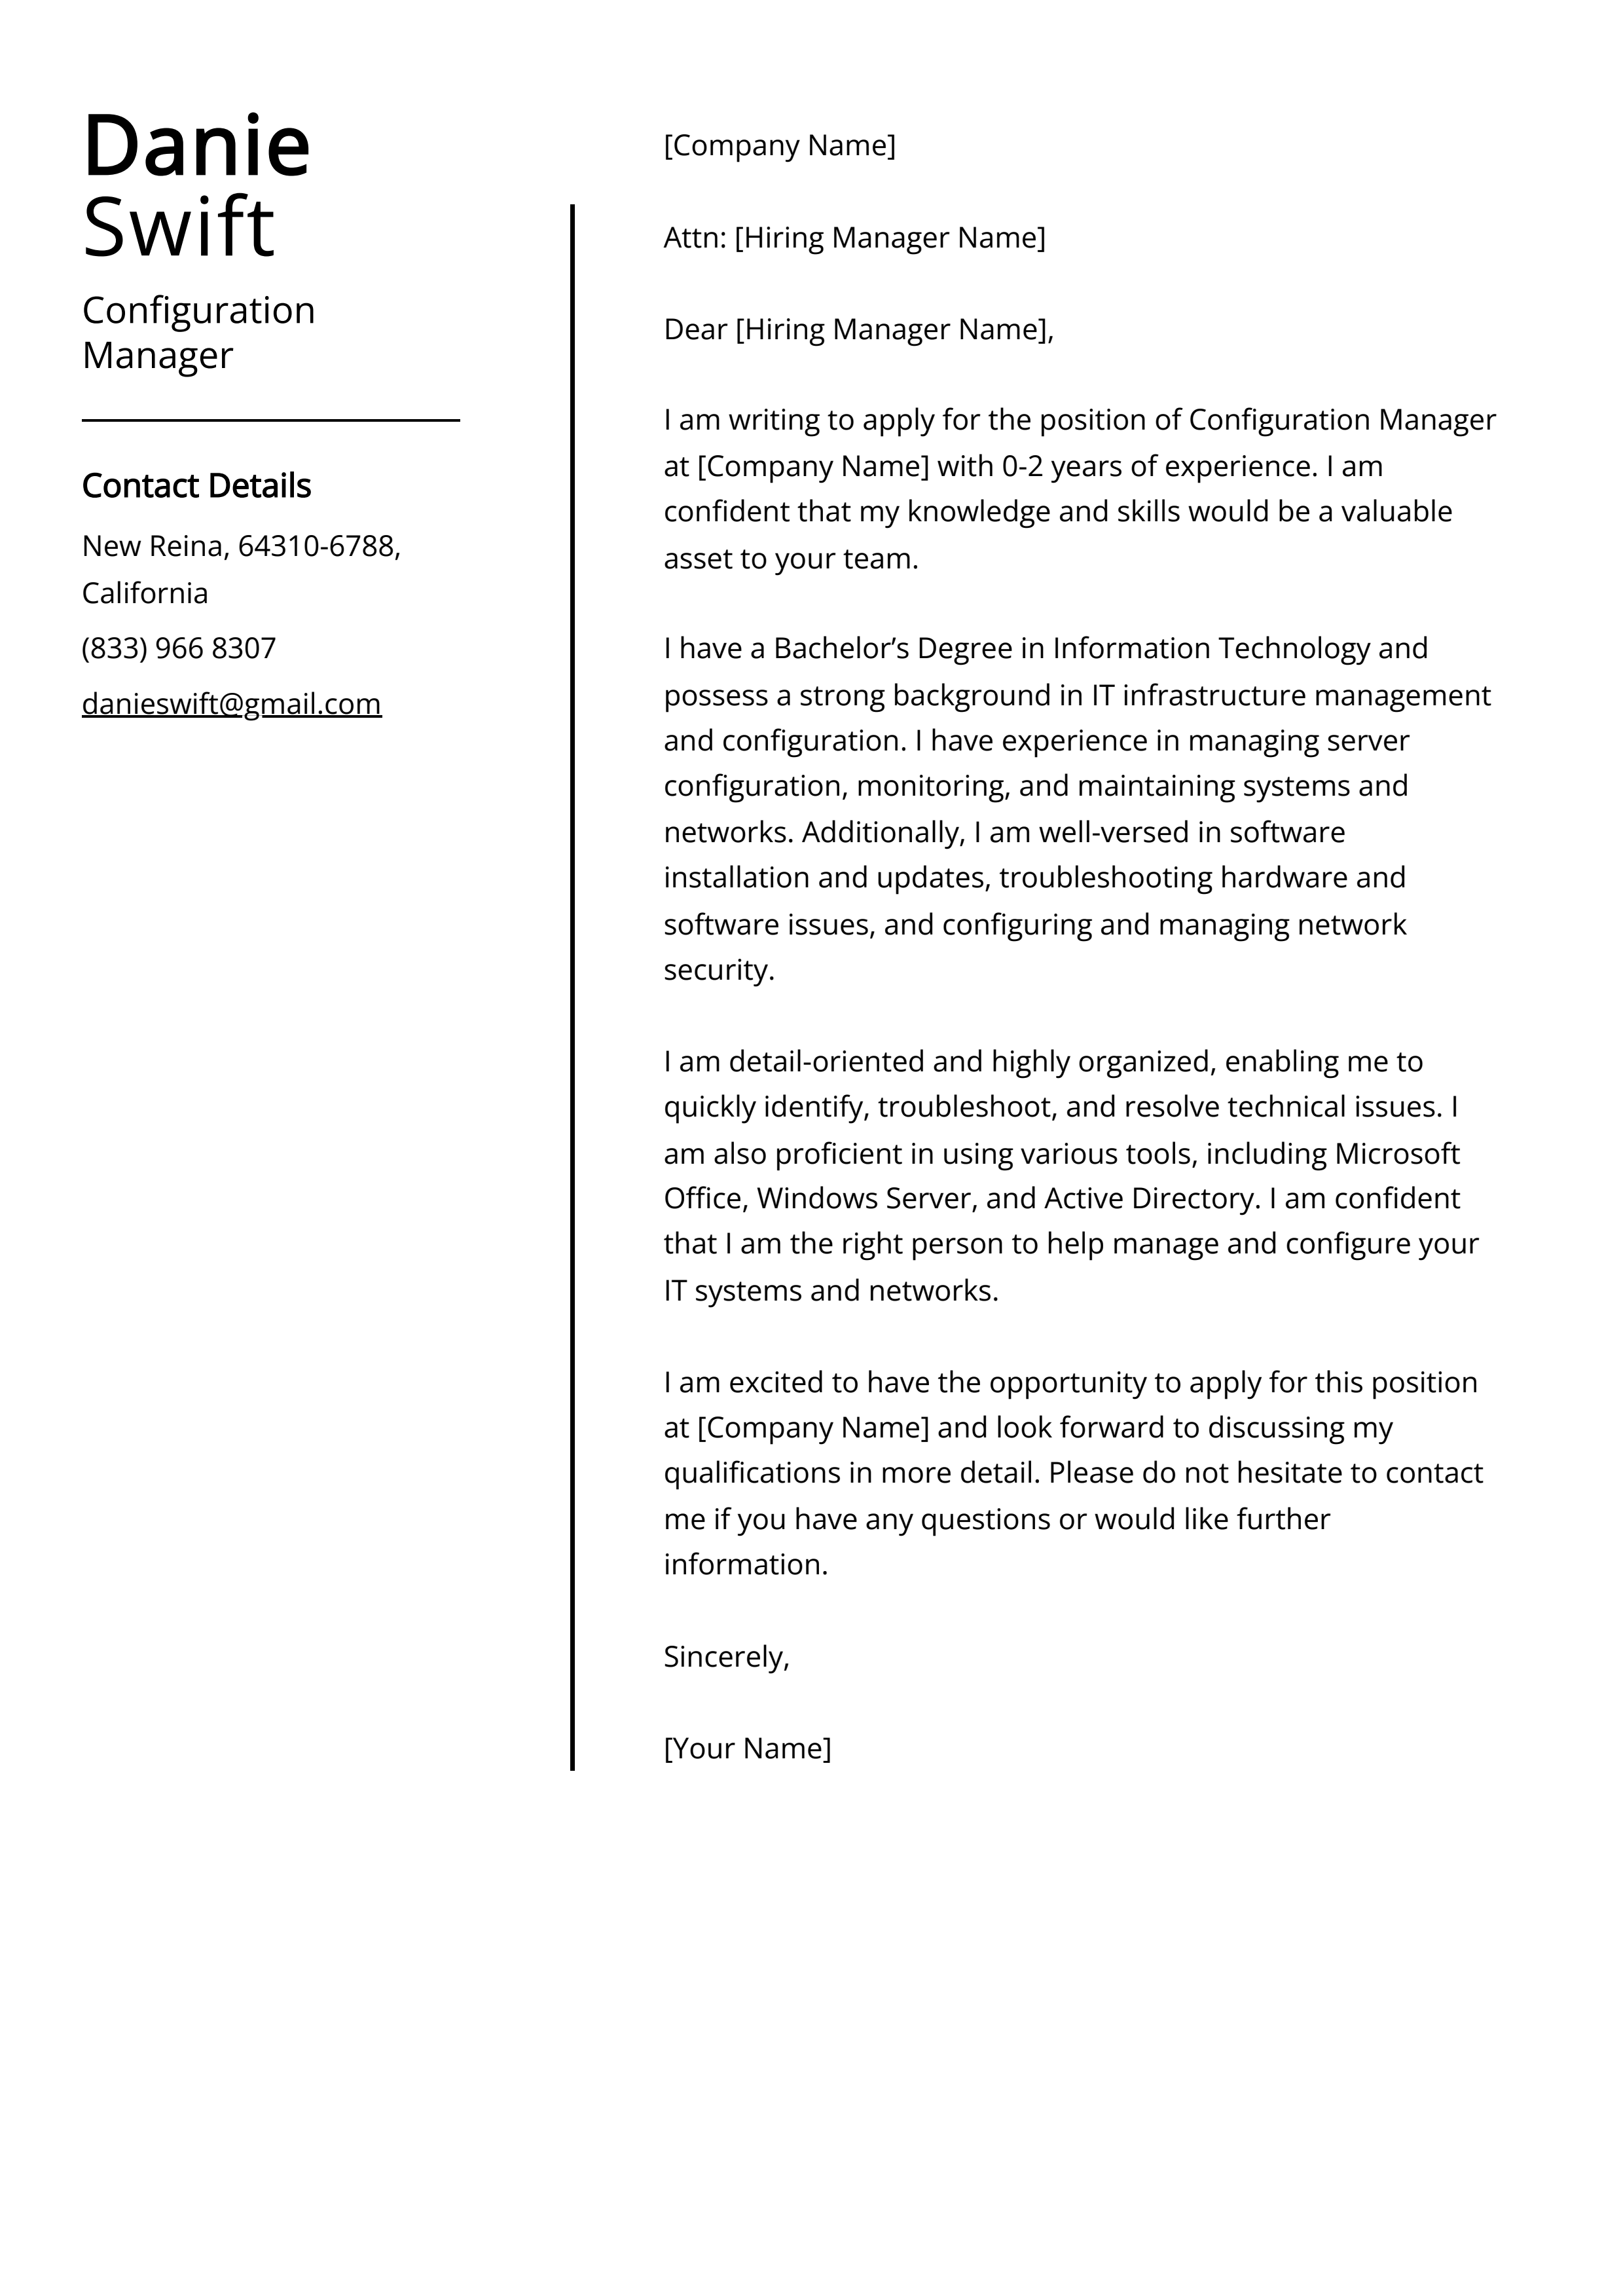 Configuration Manager Cover Letter Example